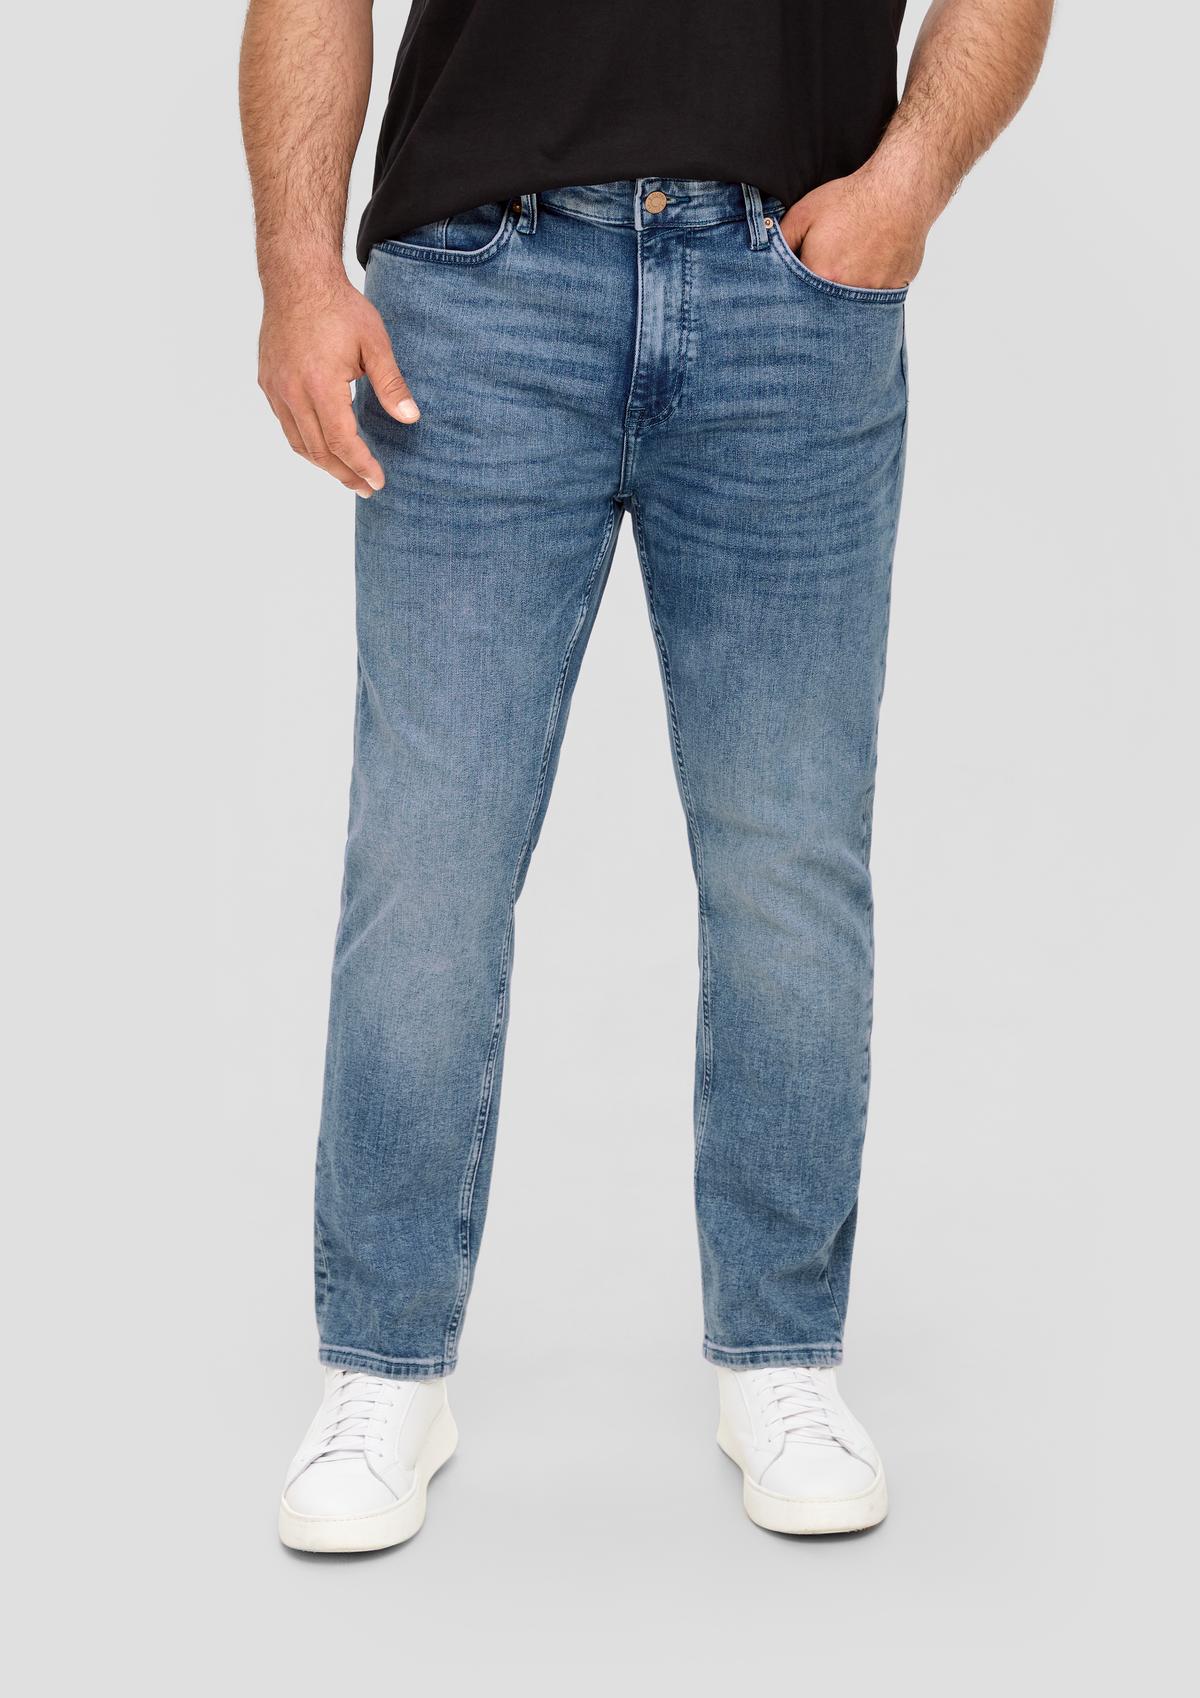 Jeans / Regular Fit / deep Mid Style 5-Pocket Leg Tapered Rise / - / blue